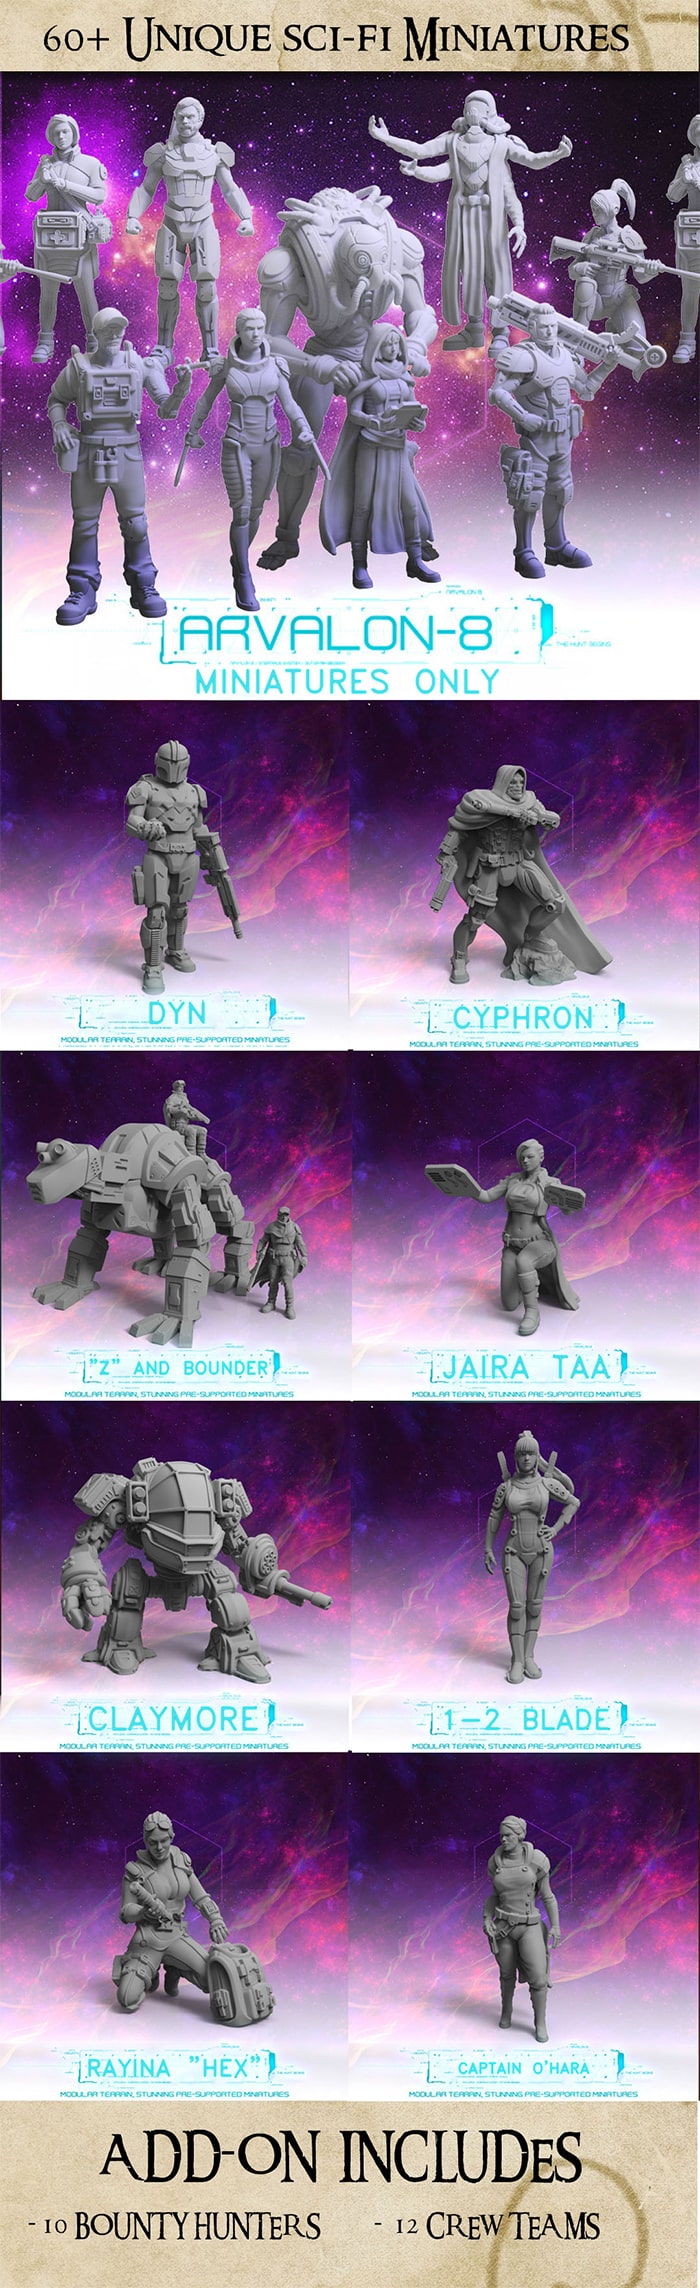 Arvalon-8 (characters)